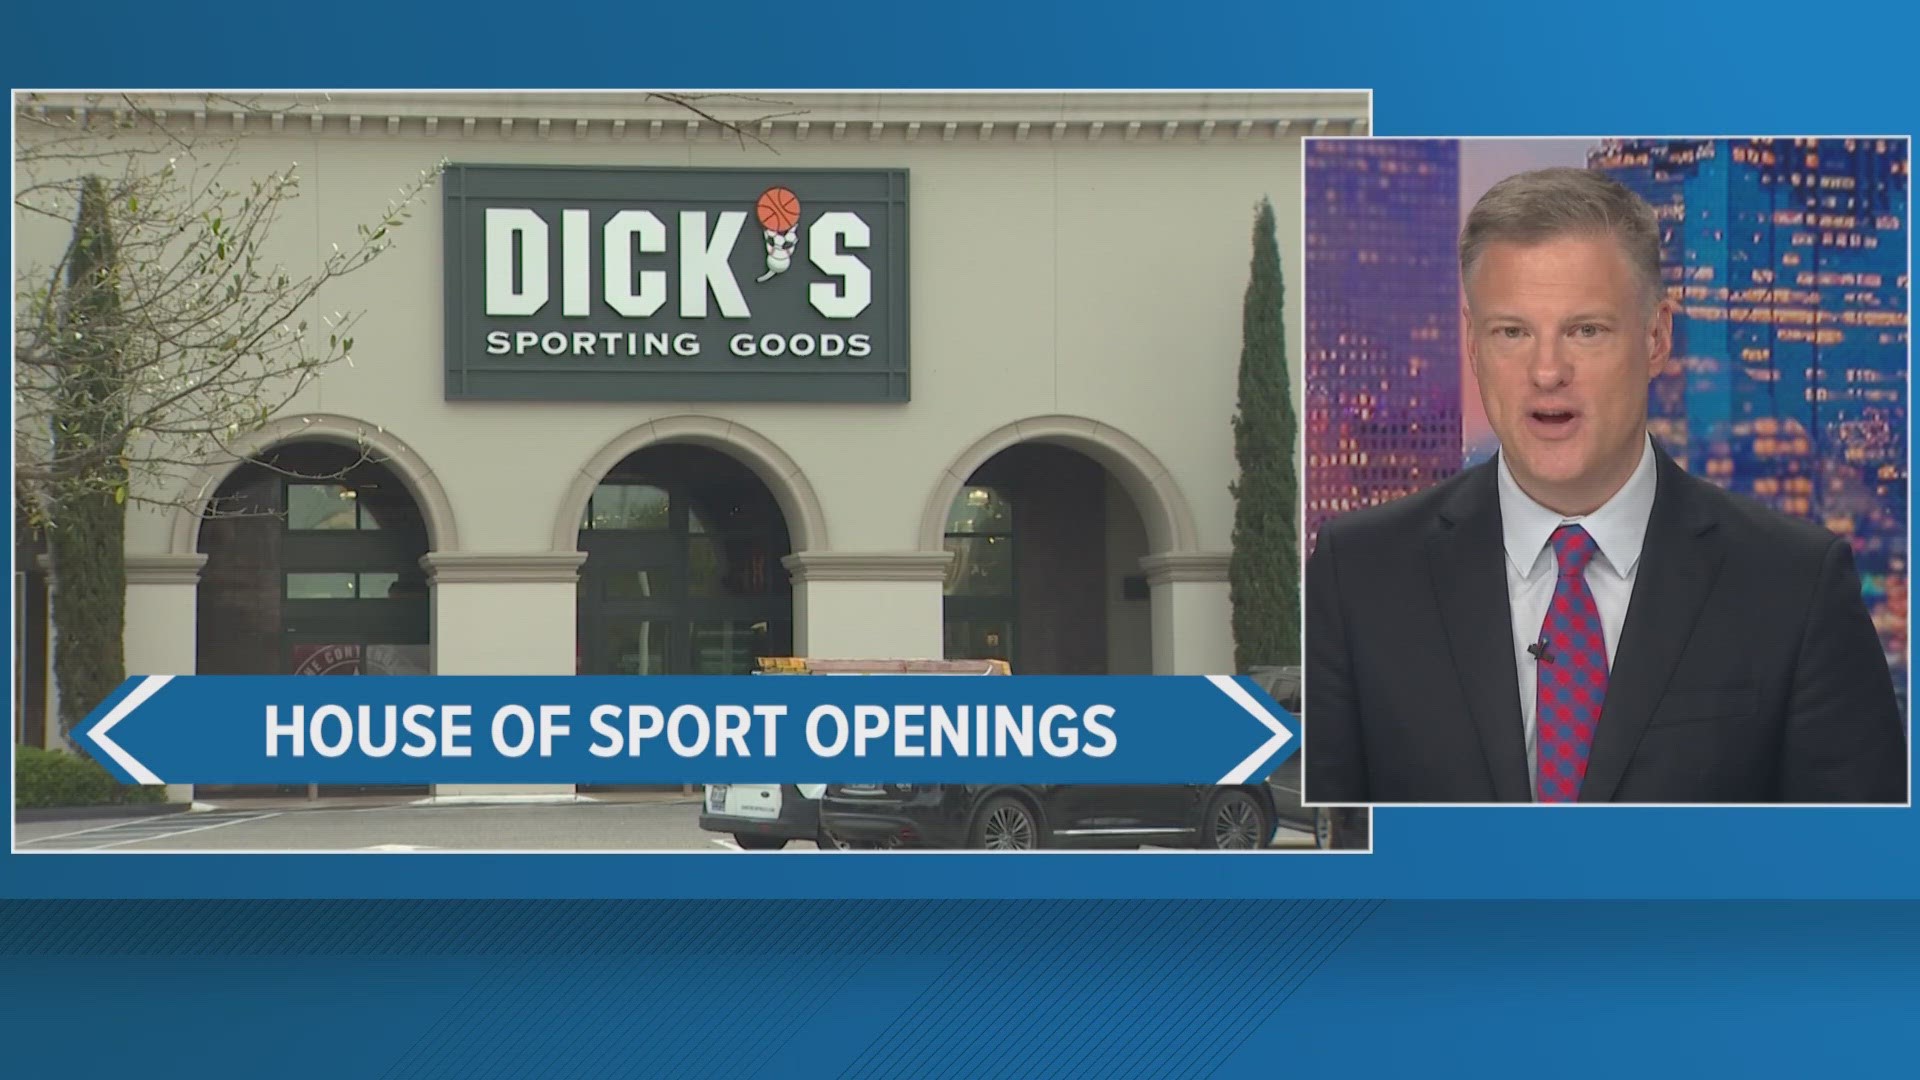 Dick's Sporting Goods House of Sport